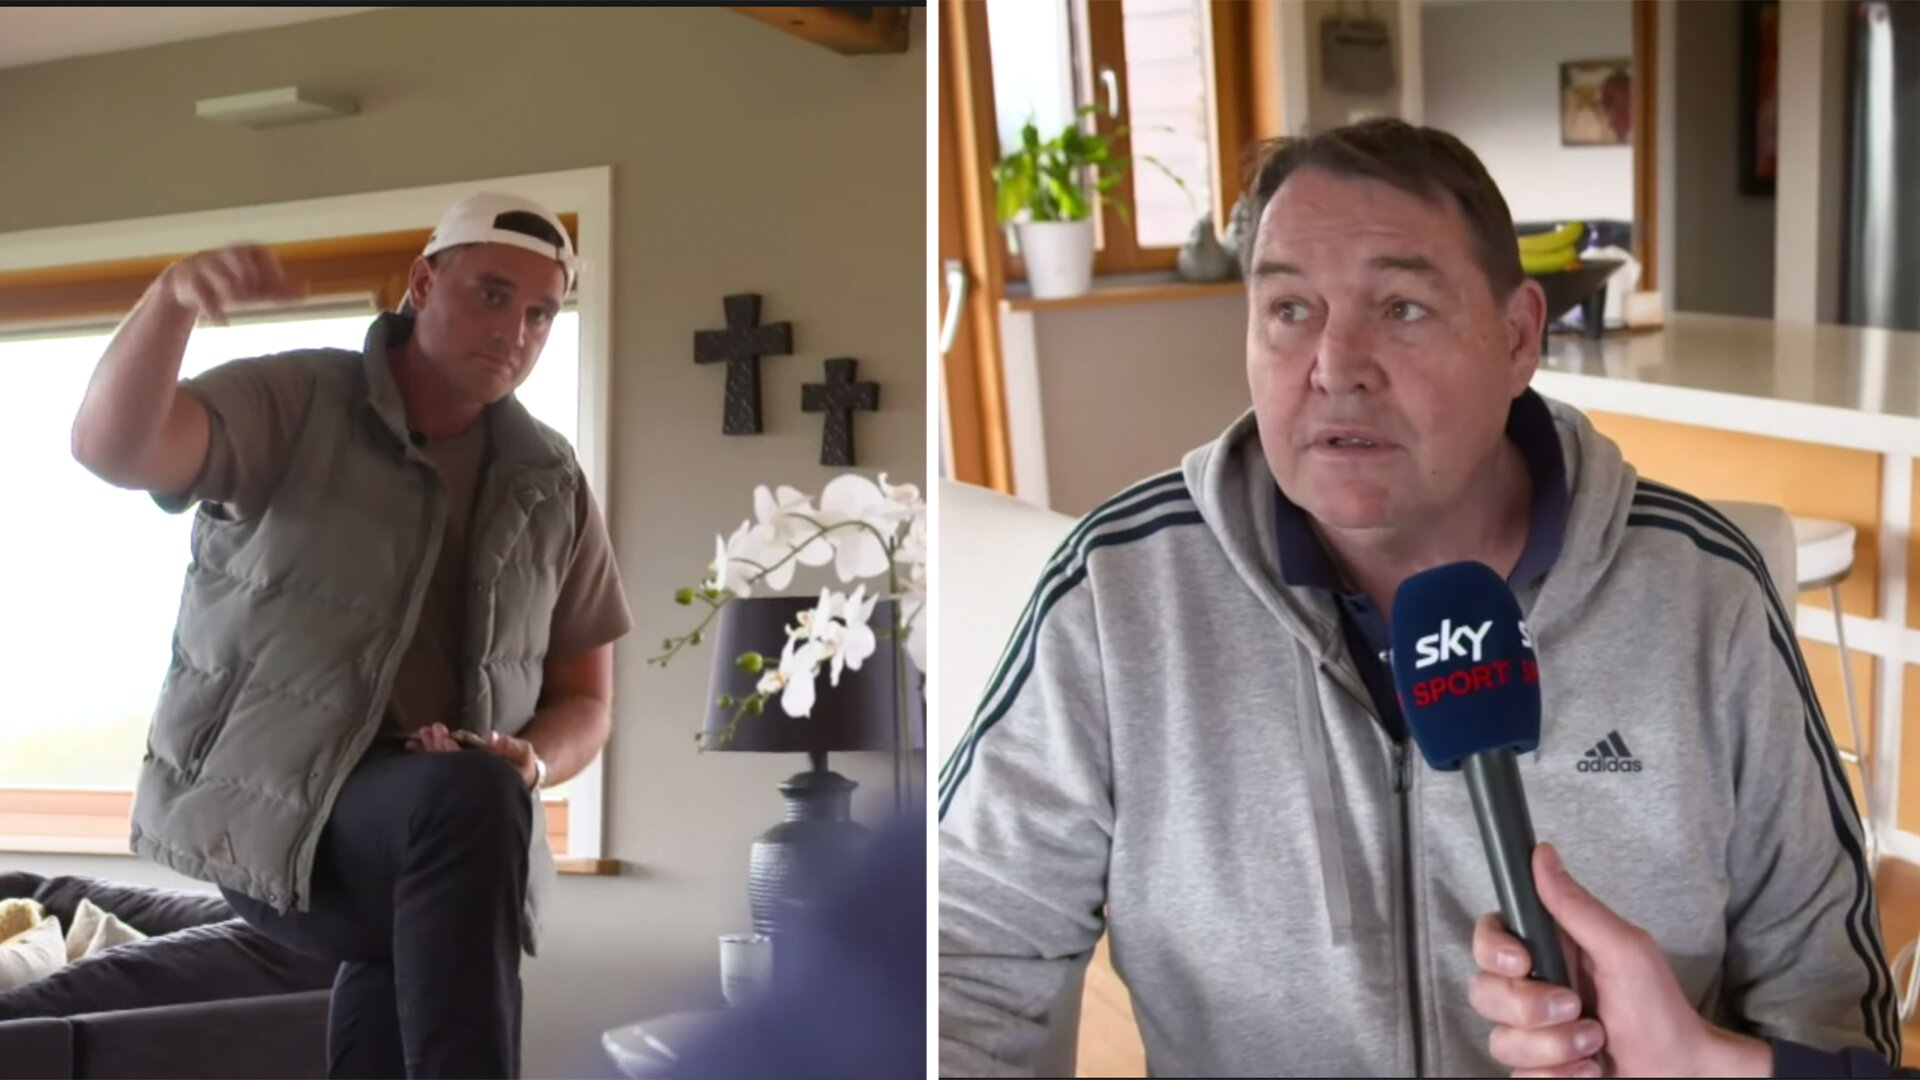 Interview with former All Black coach Steve Hansen turns awkward in hilarious video